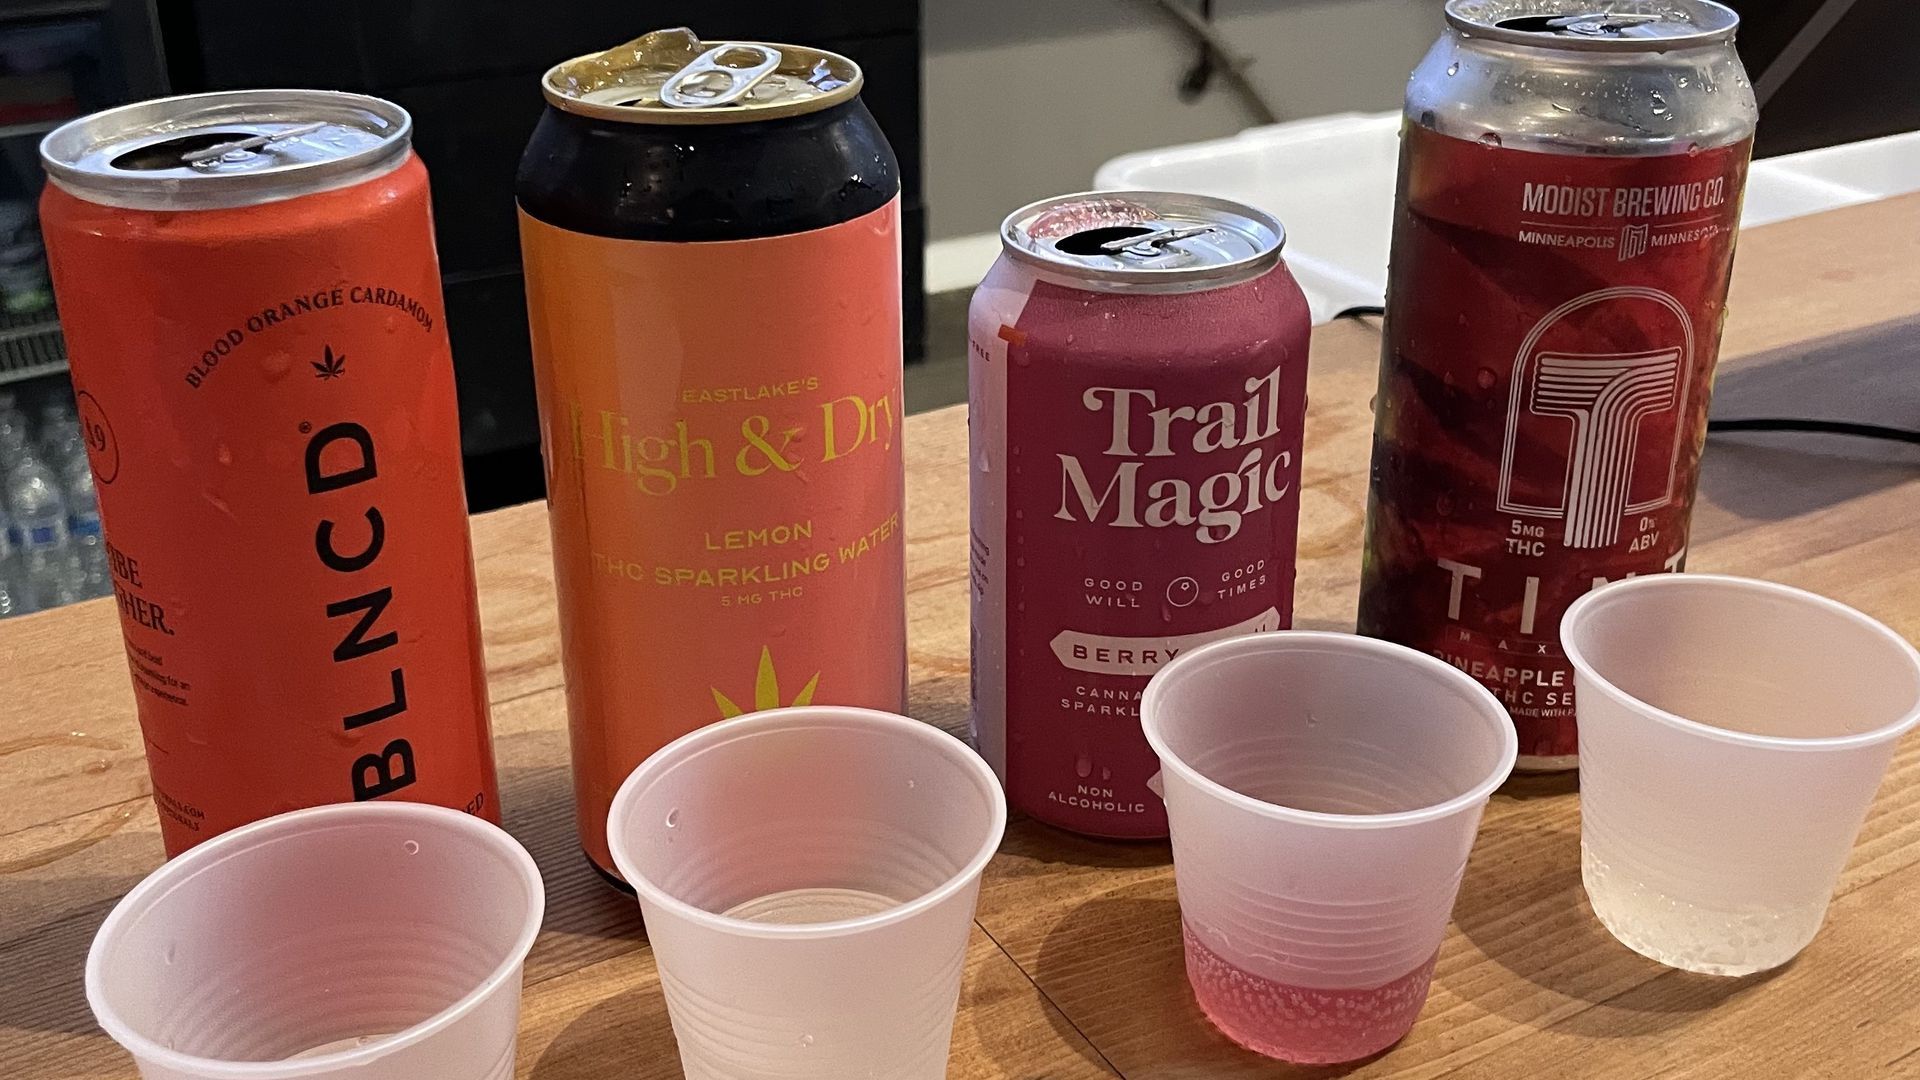 THC-infused drinks on offer at Minneapolis' Trail Magic Taproom.